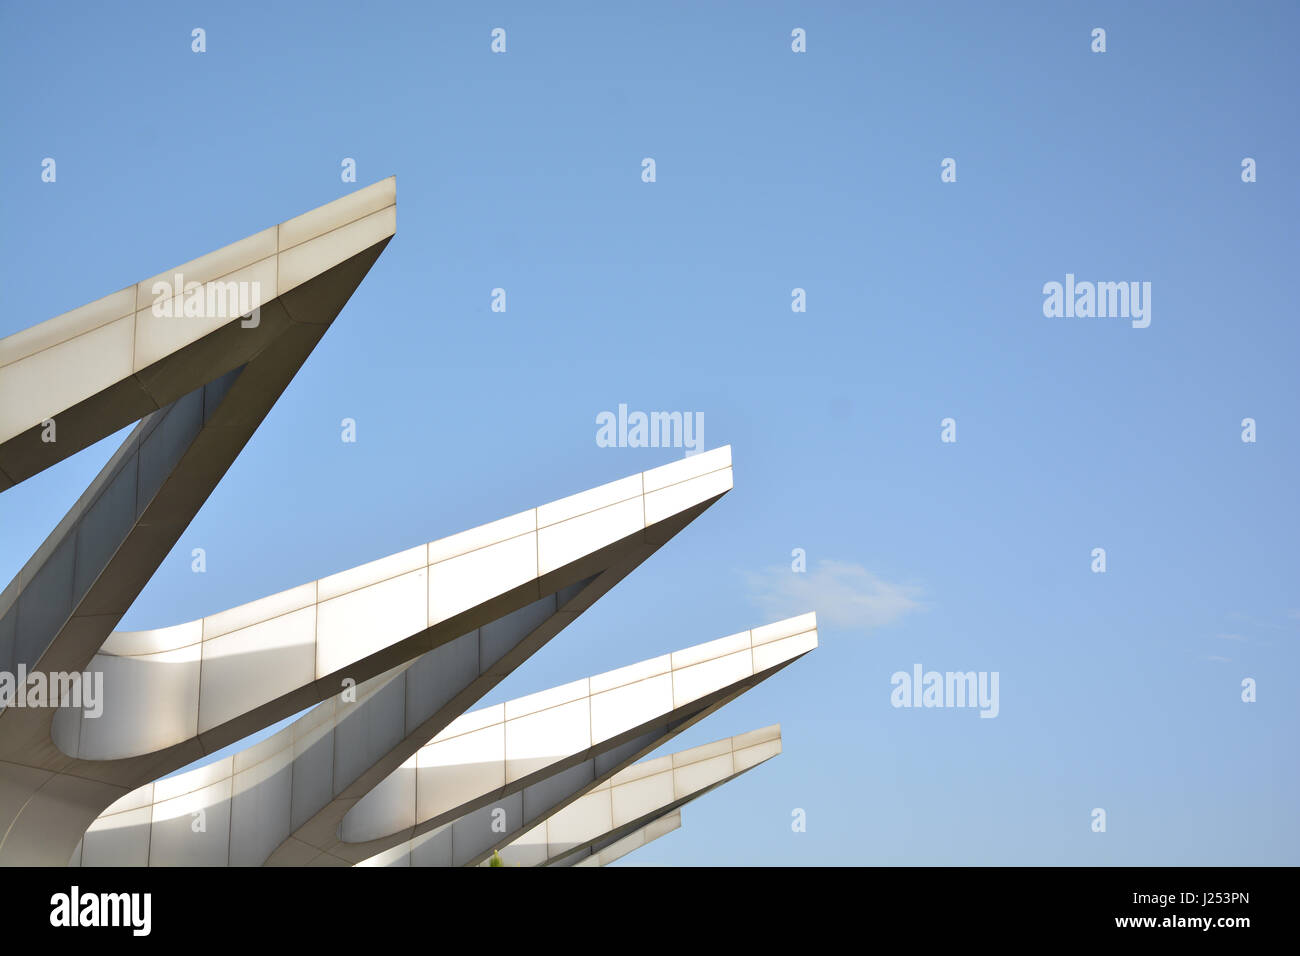 a sharp pointed building in Tehran Stock Photo